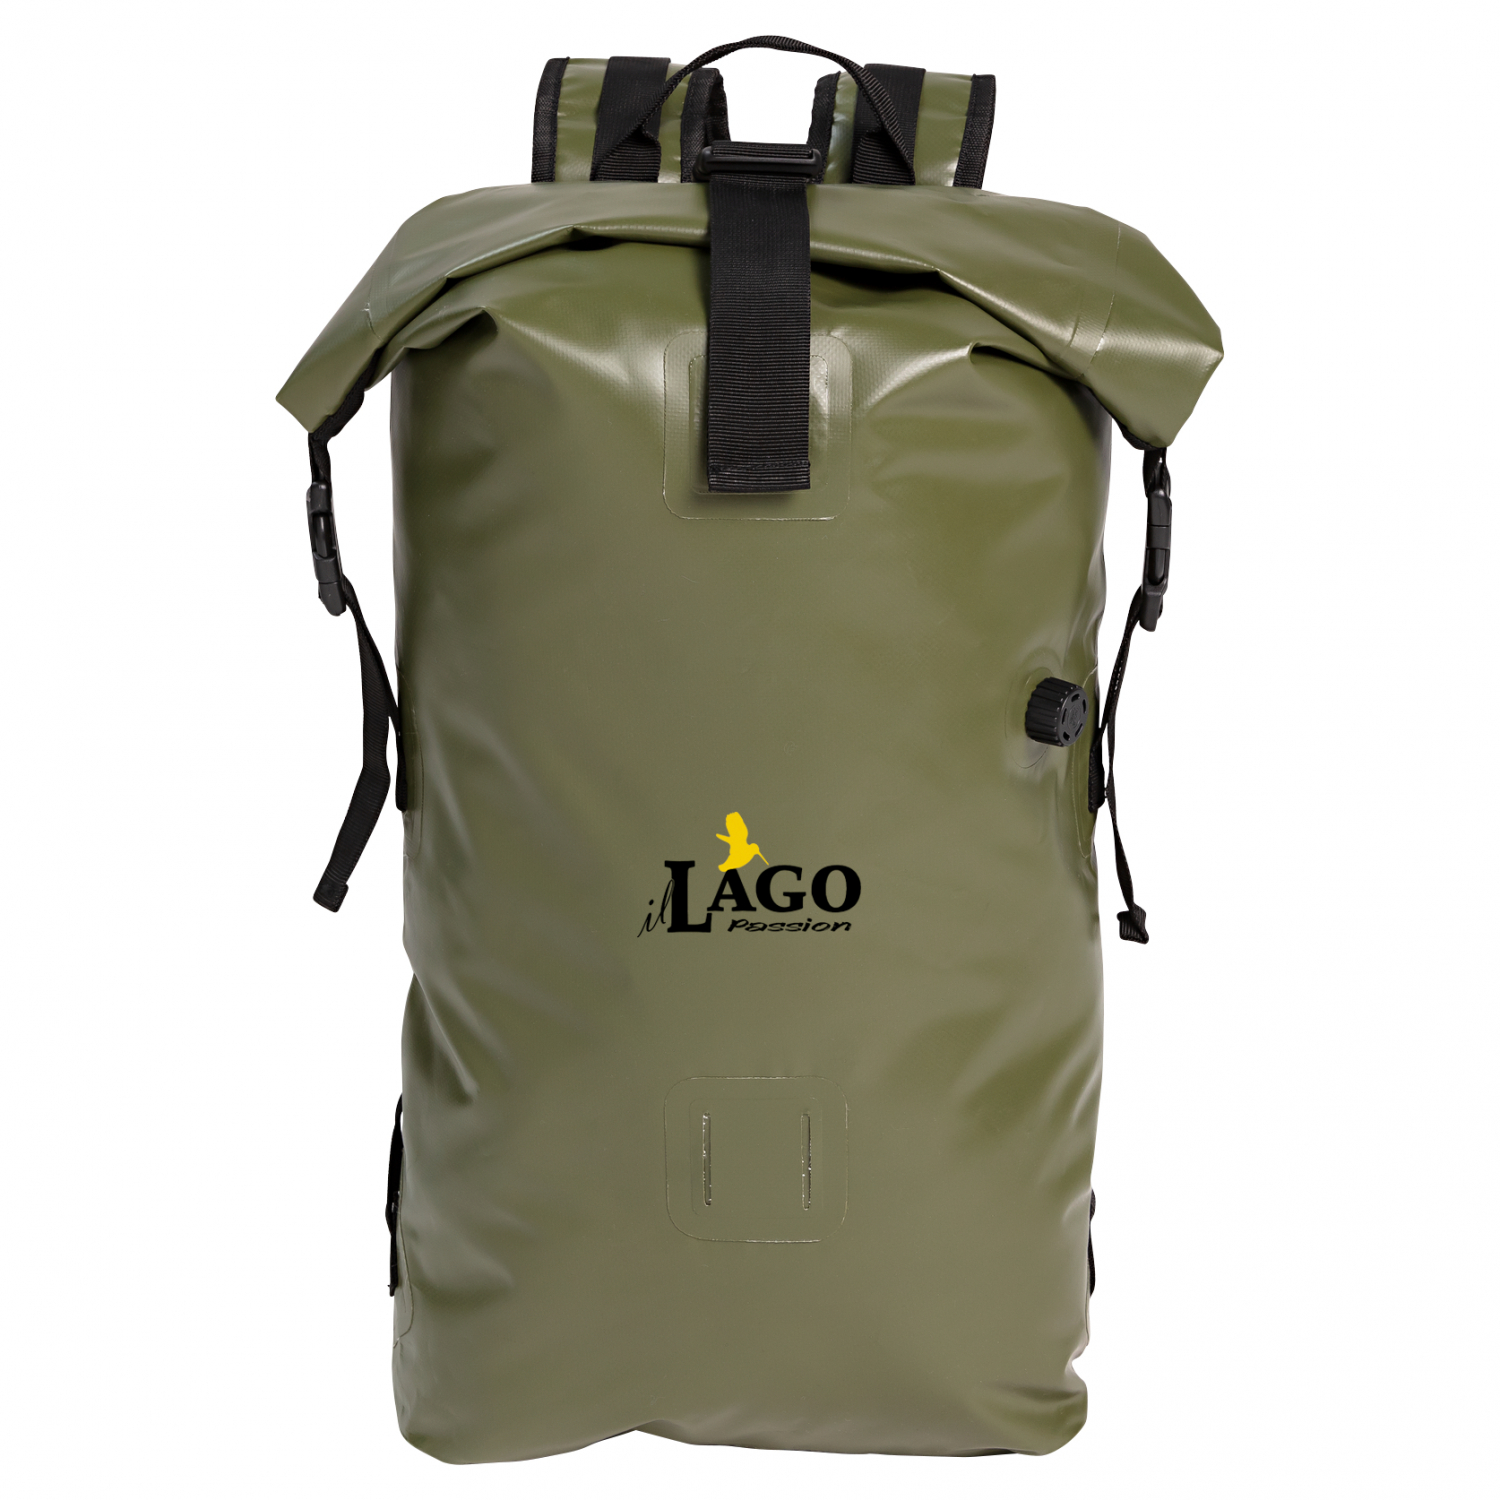 il Lago Passion Waterproof Backpack Rover 